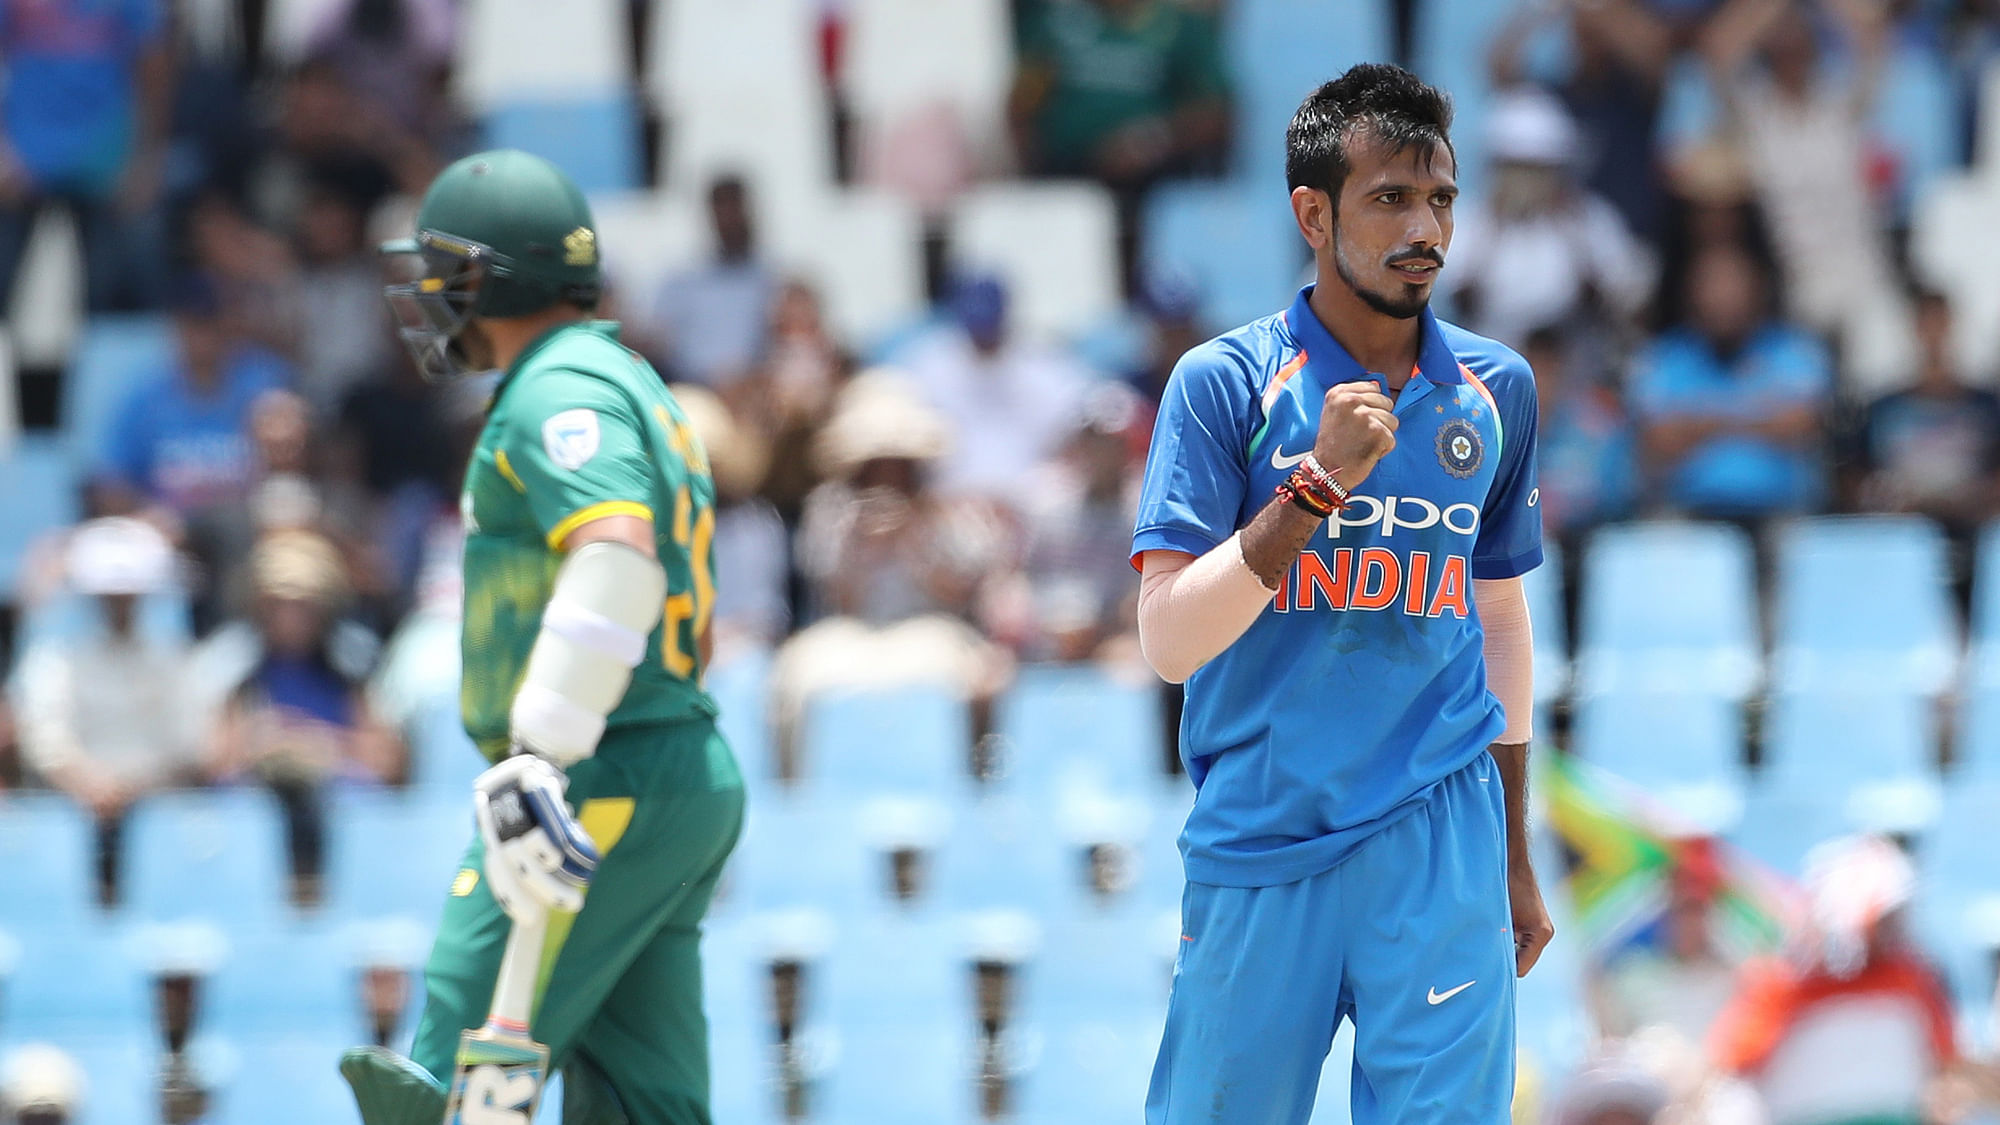 Yuzvendra Chahal picked up a fifer on Sunday.